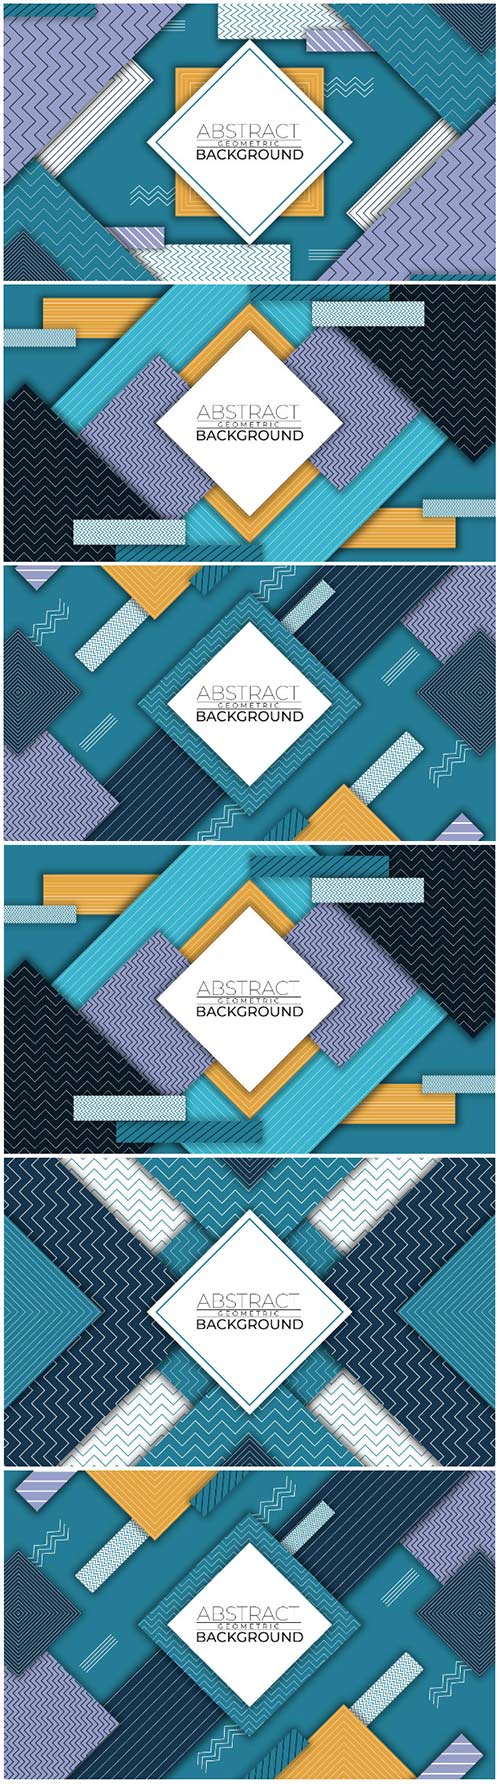 Modern abstract geometric vector background style